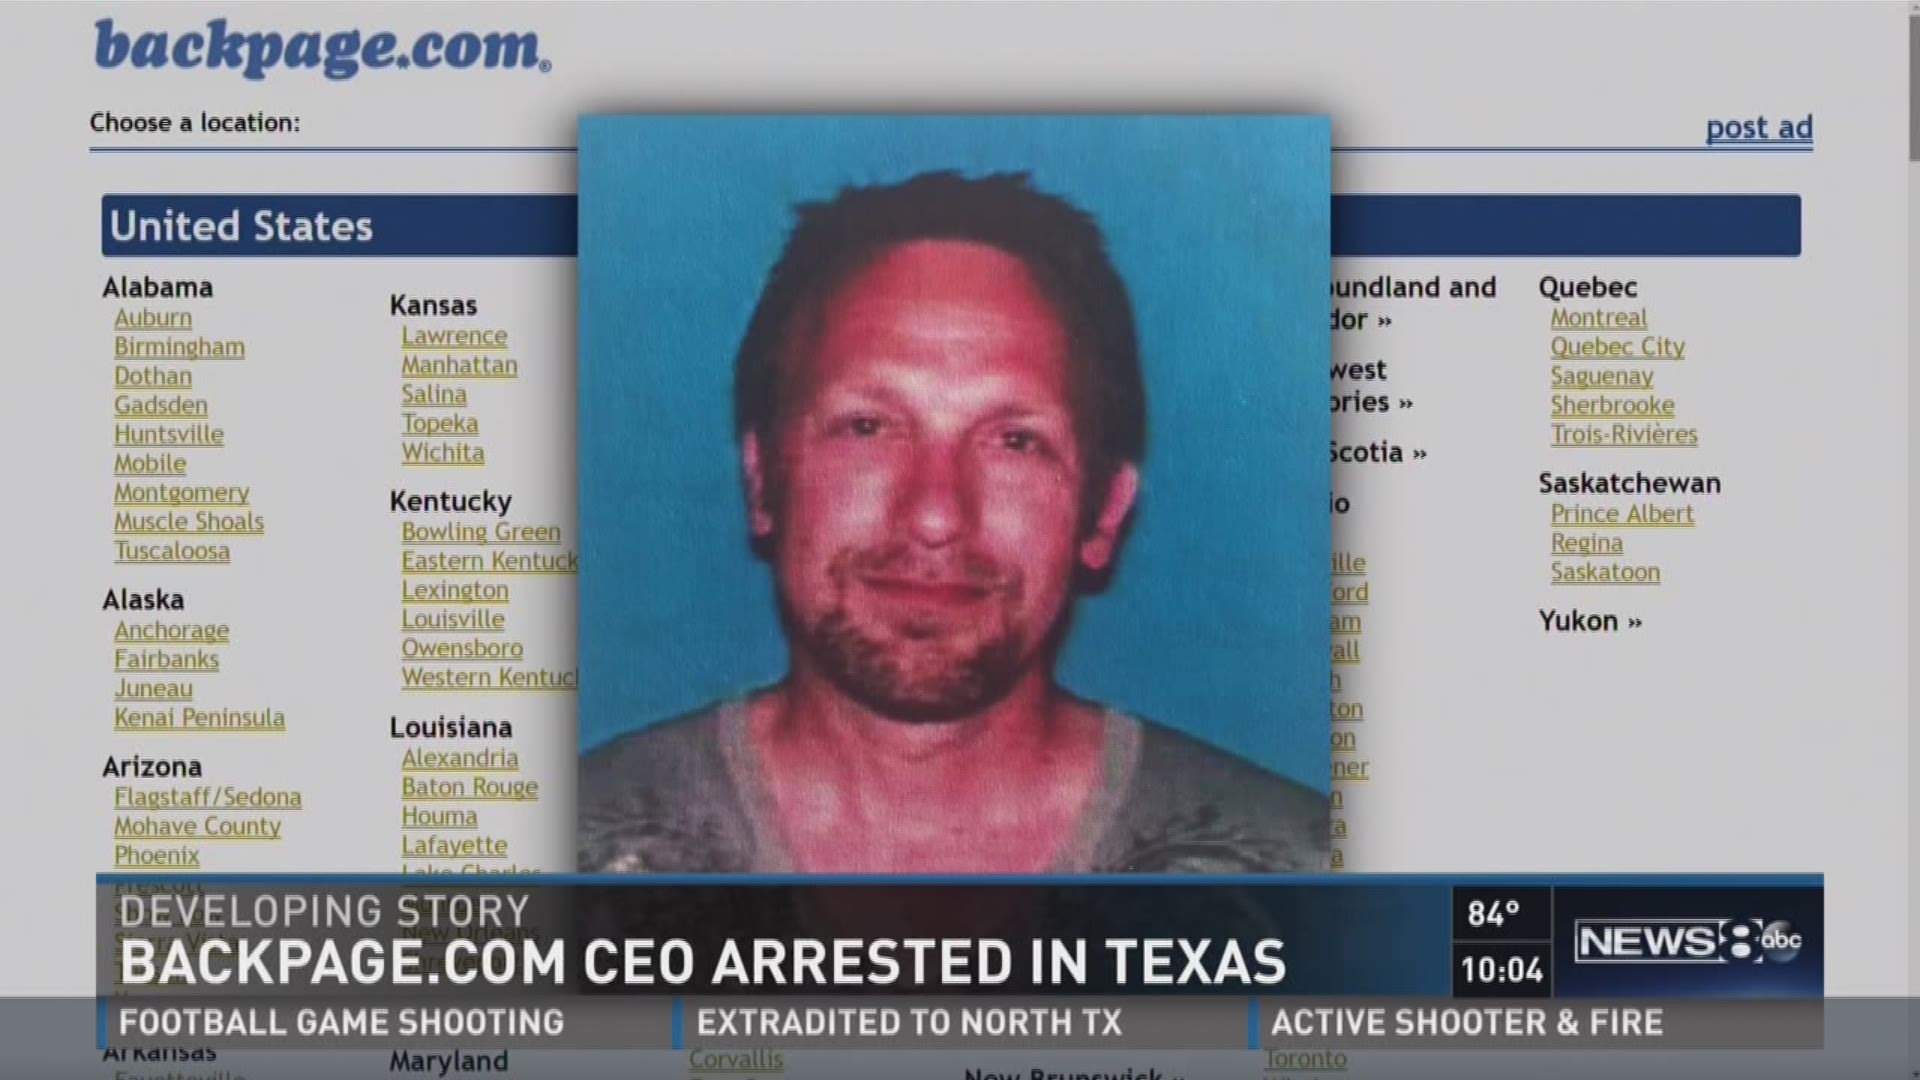 Carl Ferrer, the CEO of a Dallas-based website allegedly involved in sex trafficking, was arrested at Houston's Bush Intercontinental Airport Thursday. Jason Whitely has more.